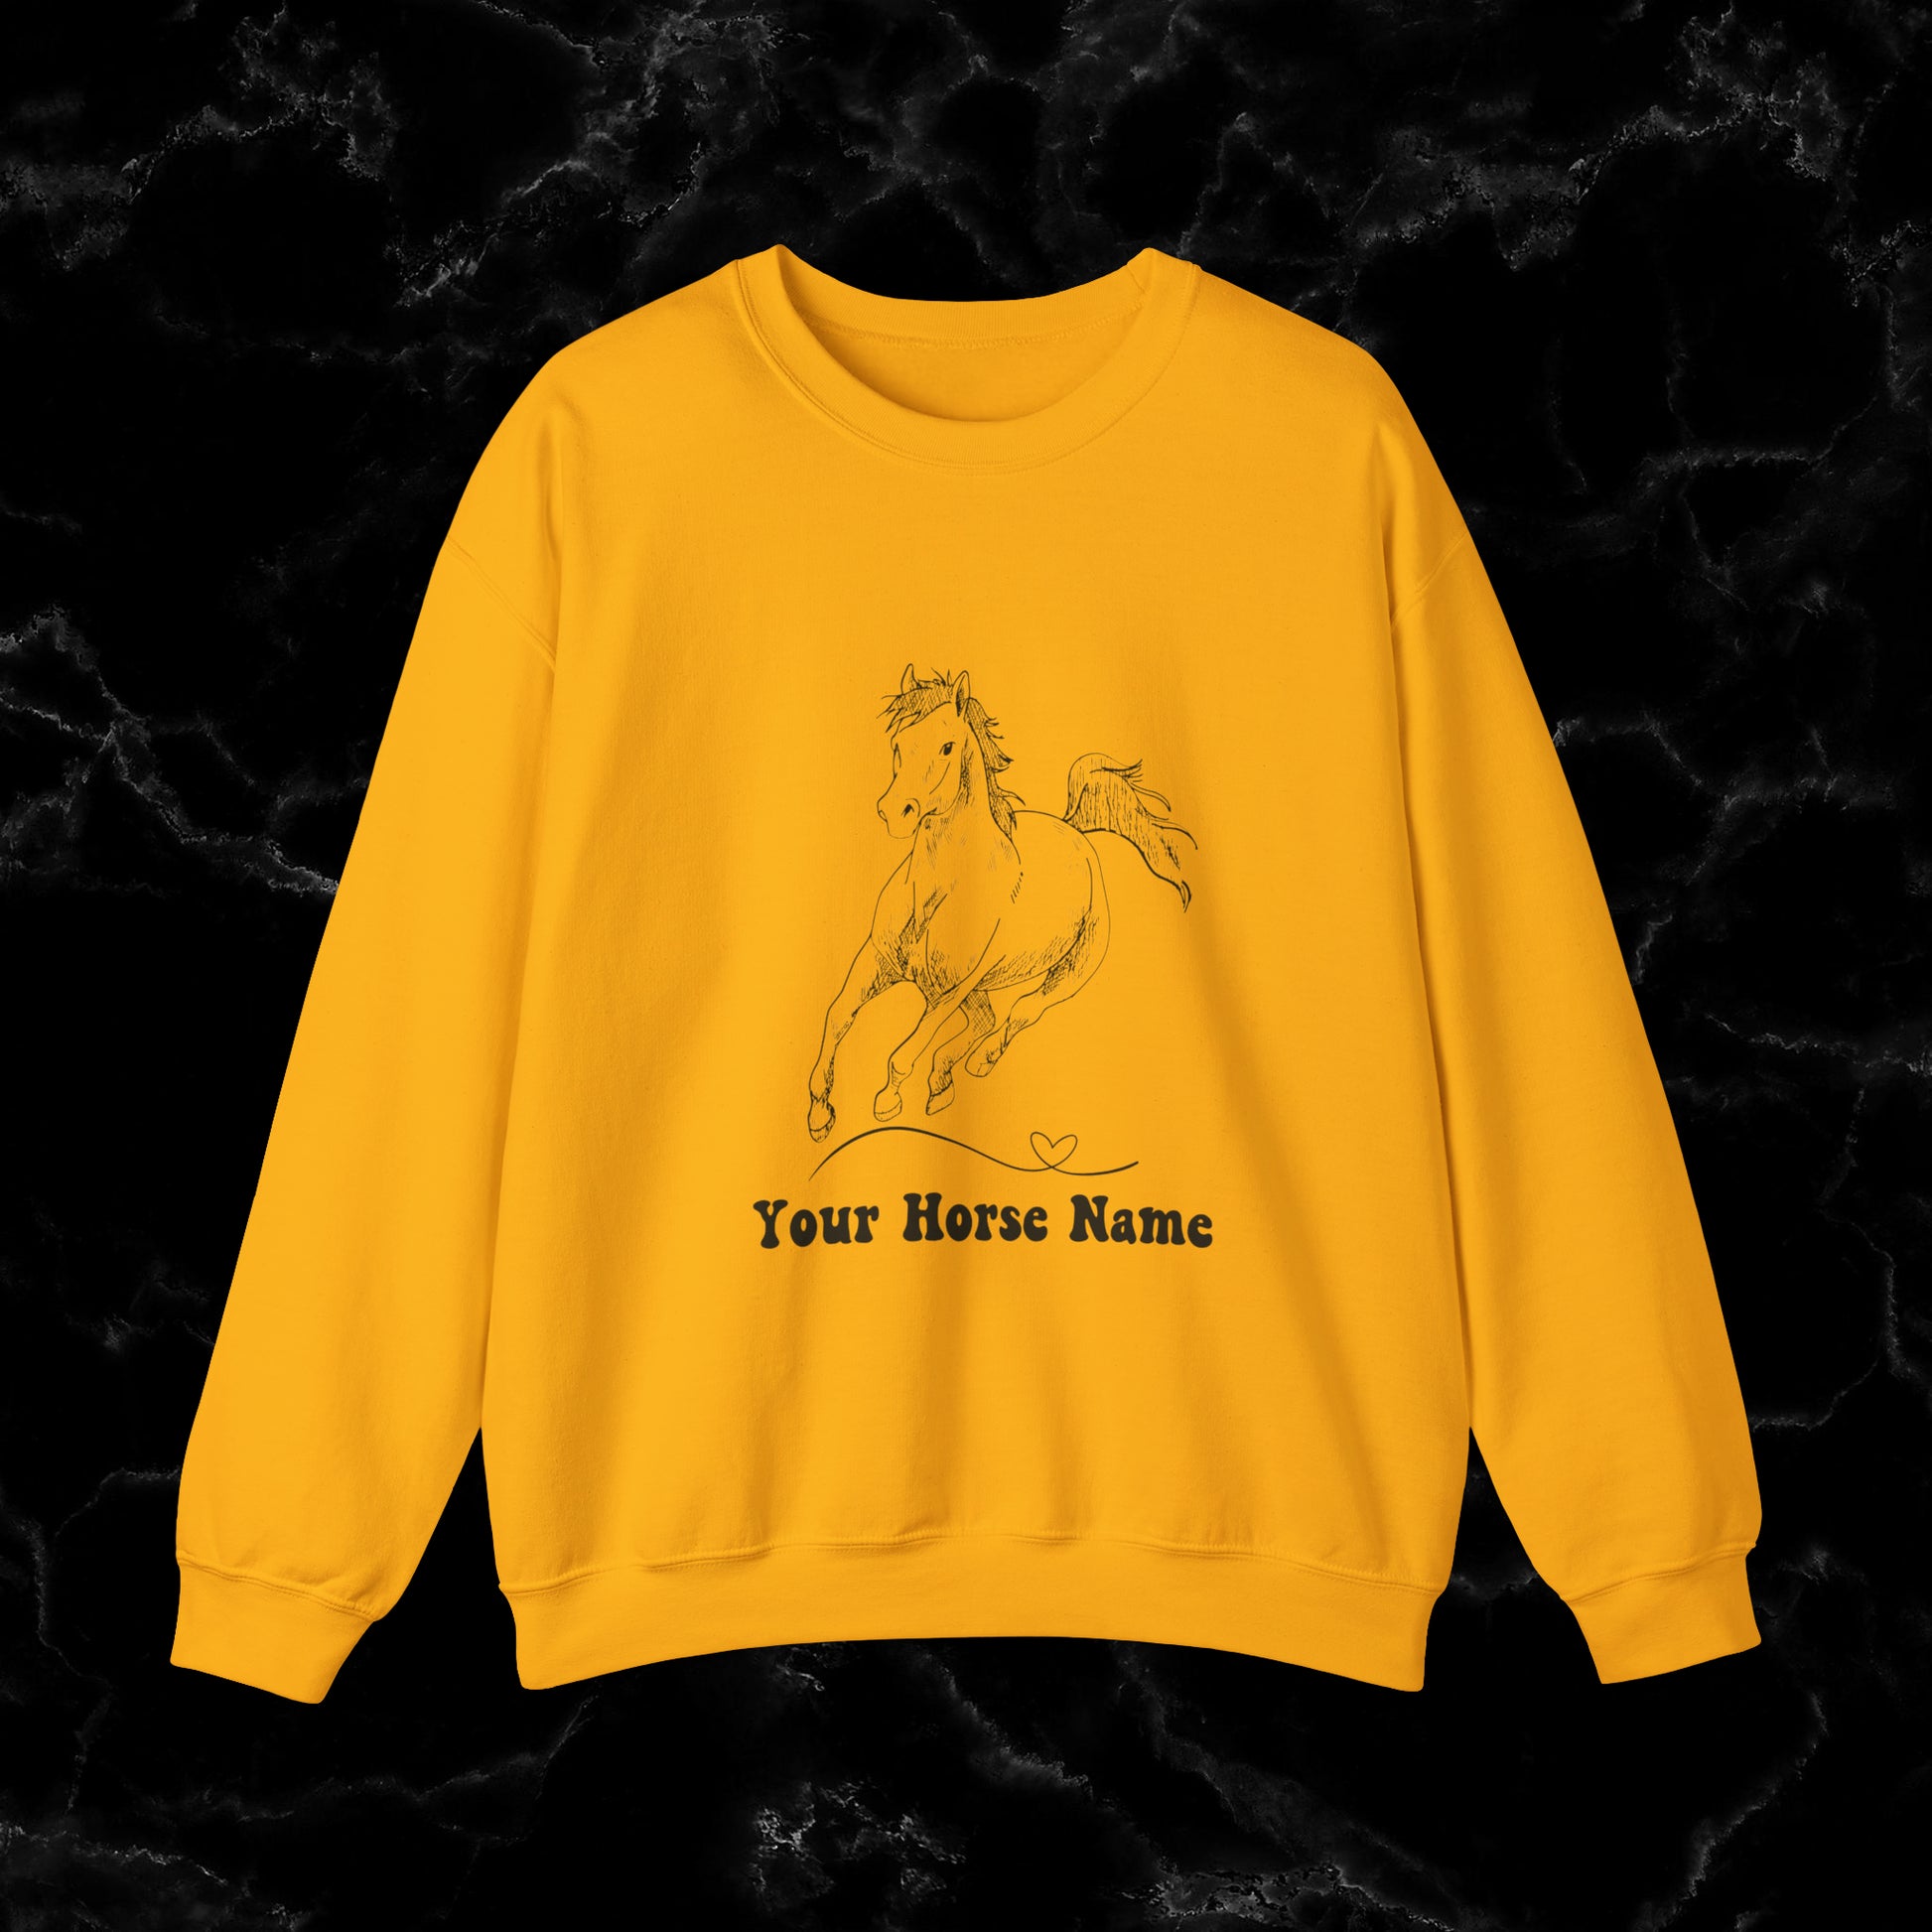 Personalized Horse Sweatshirt - Gift for Horse Owner, Perfect for Christmas, Birthdays, and Equestrian Enthusiasts - Wrap Up Warmth and Personal Connection with this Thoughtful Horse Lover's Gift Sweatshirt S Gold 